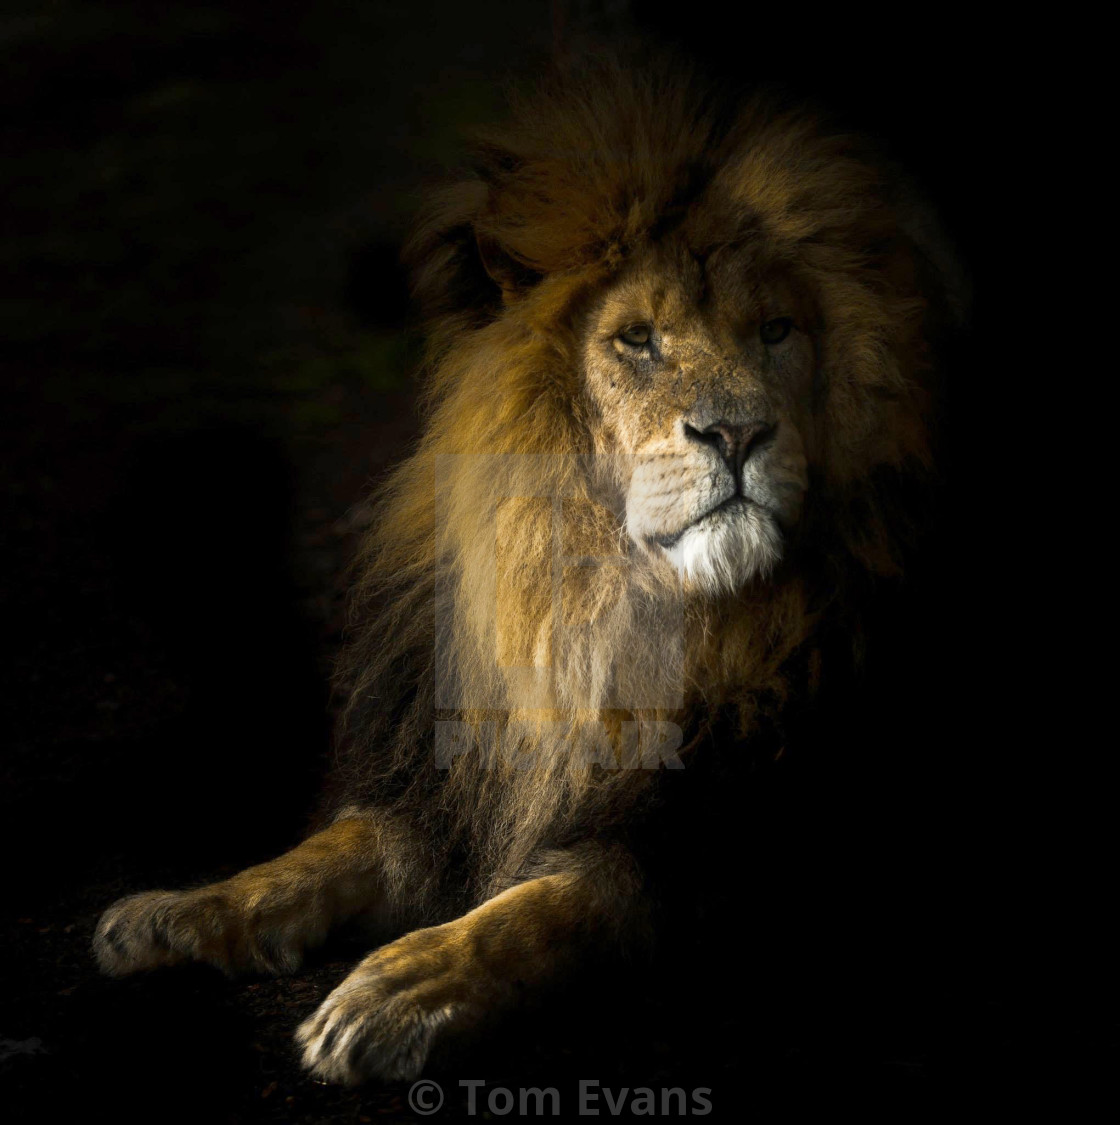 Proud Lion in dramatic light - License, download or print for £12.40 | Photos Picfair